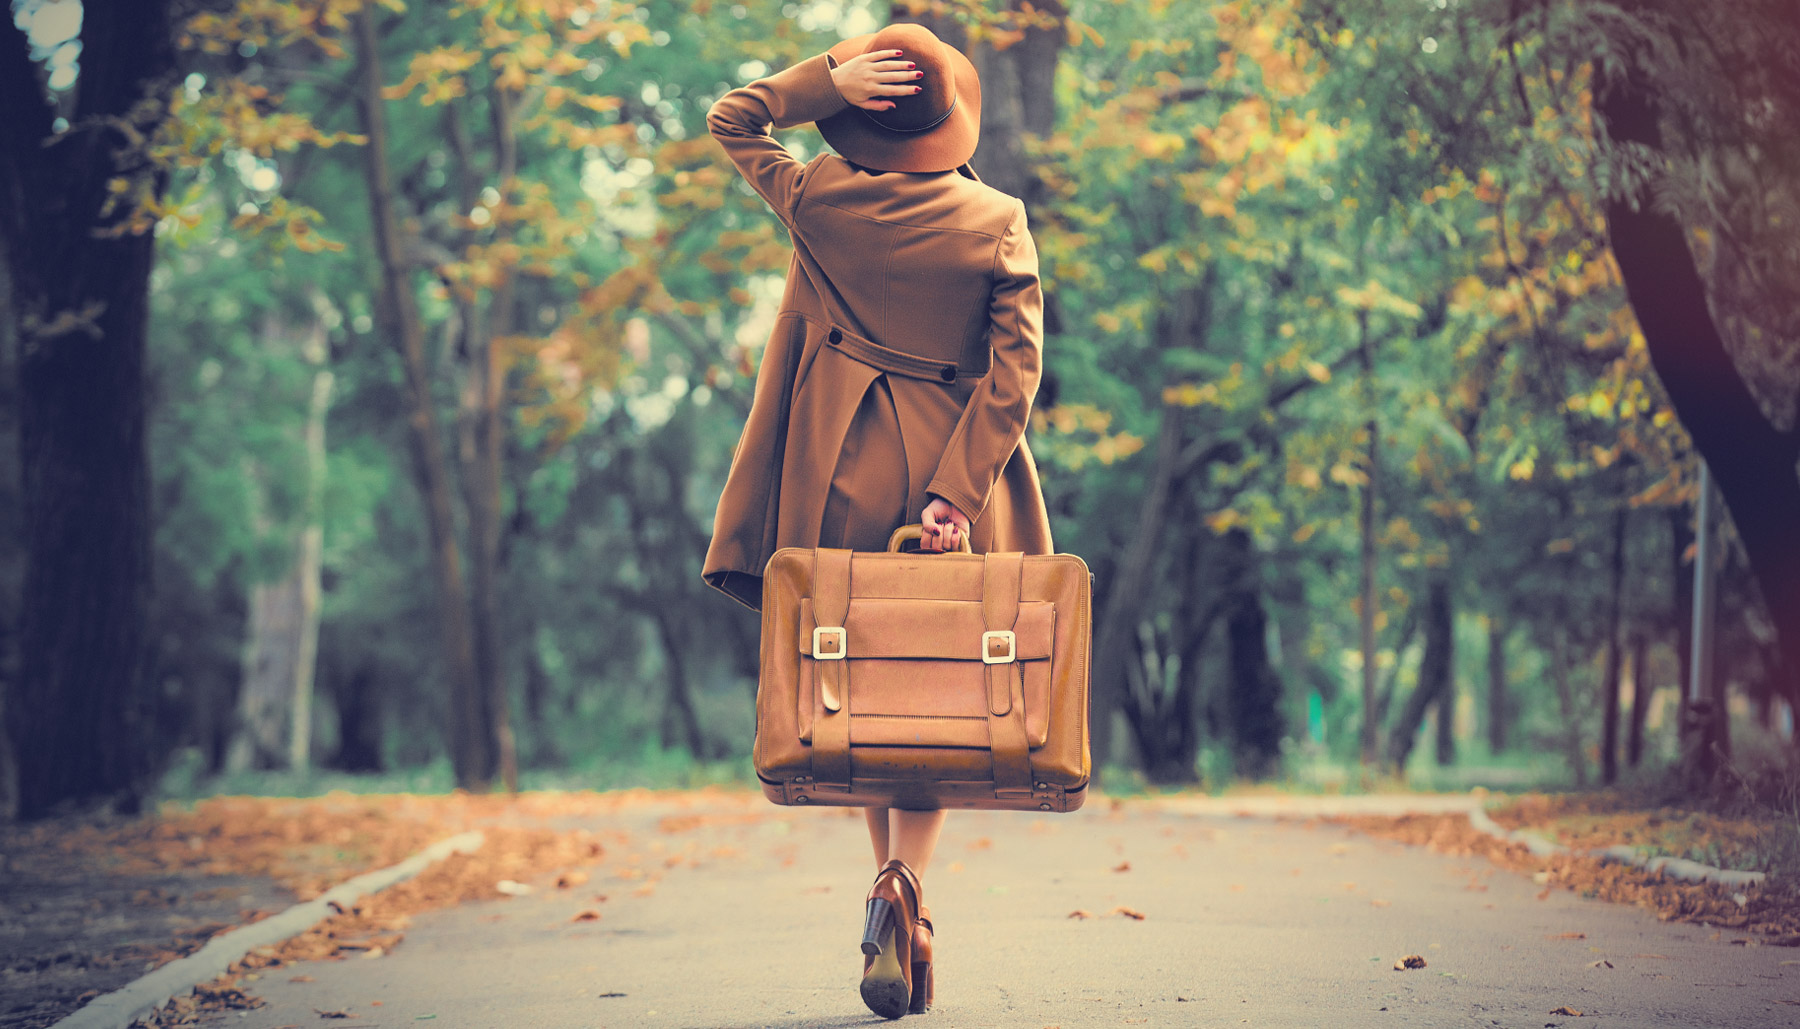 Woman with old suitcase